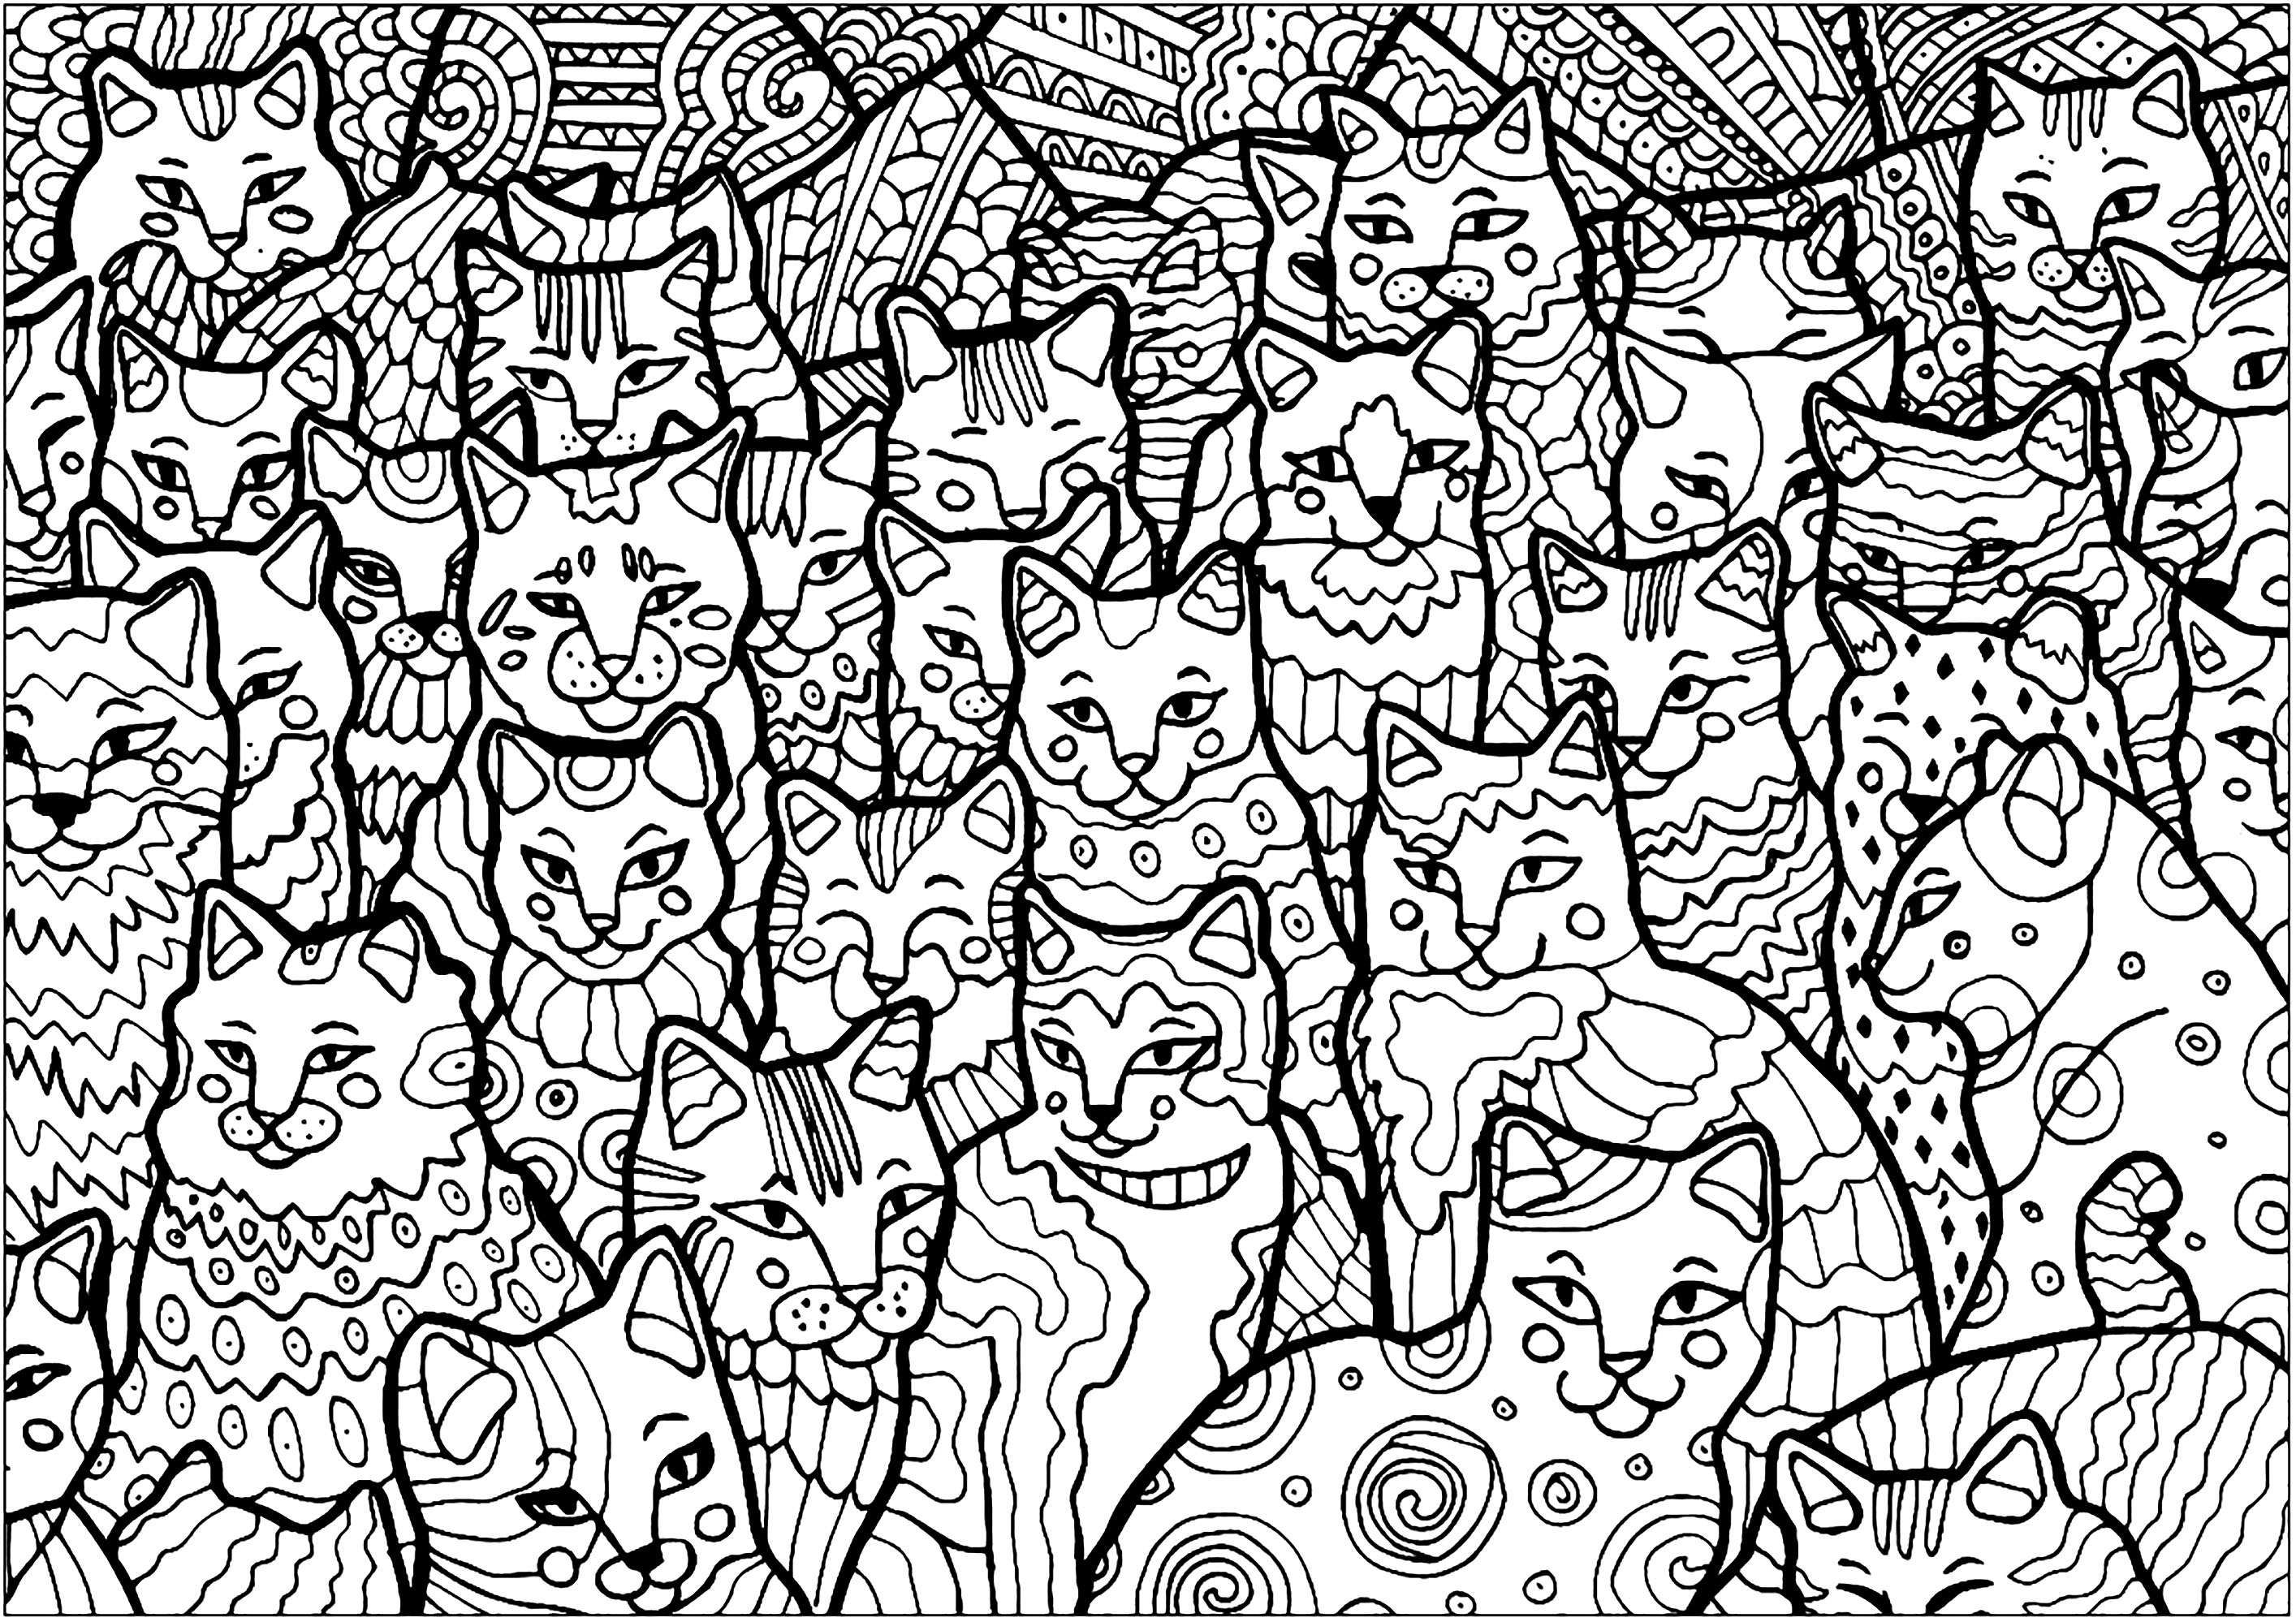 A coloring page full a cute cats, all differents